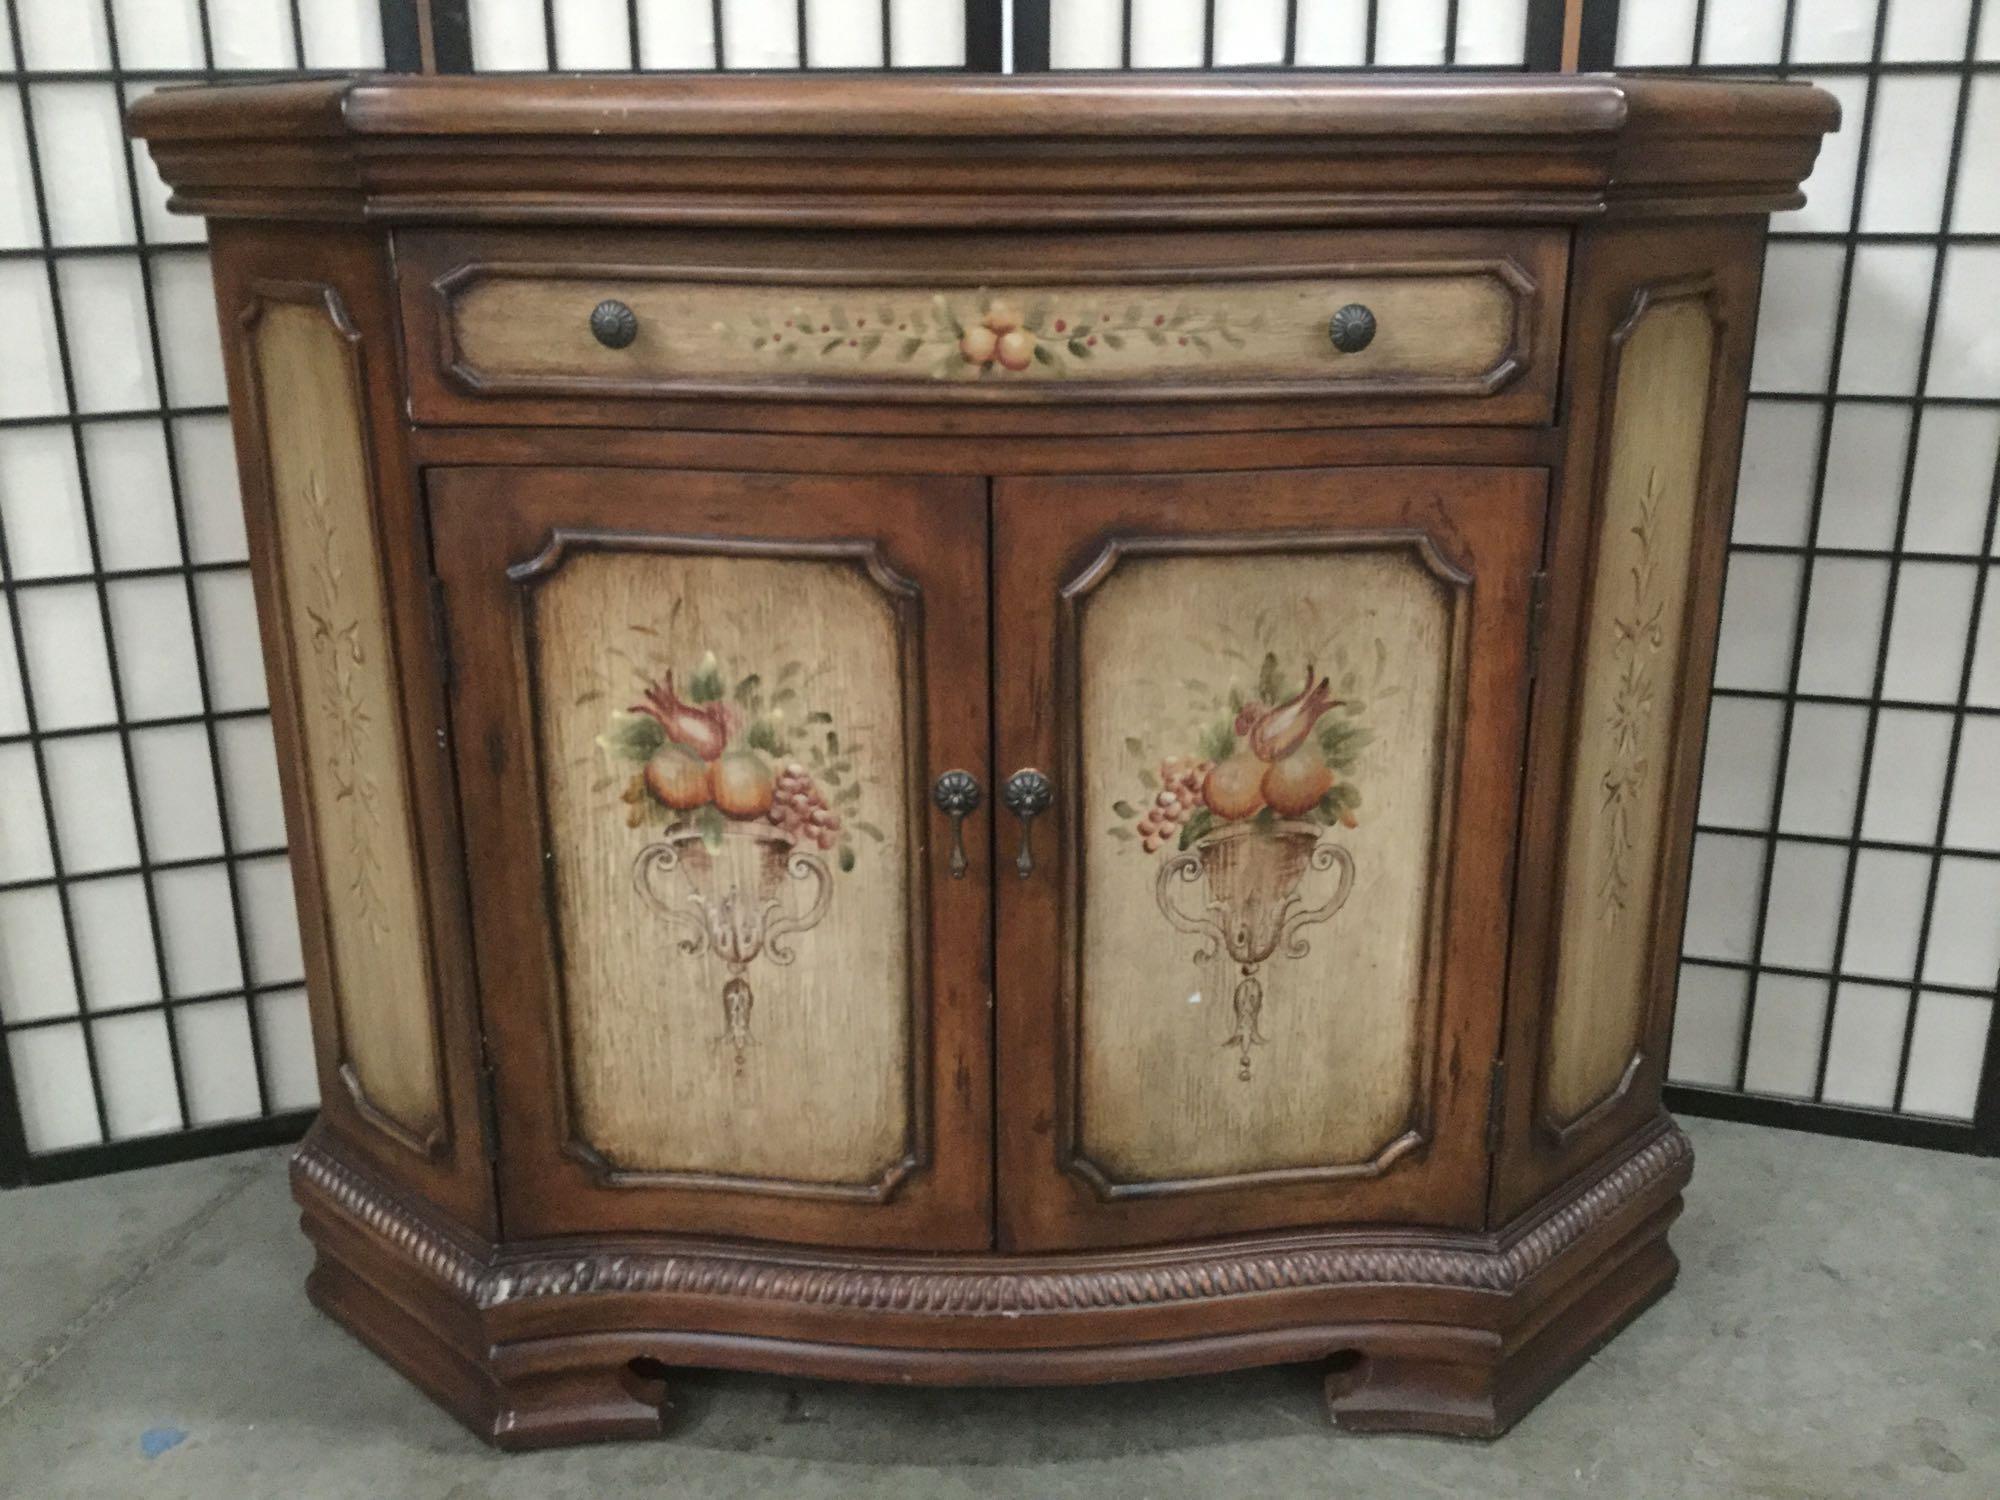 Antique style sideboard cabinet reproduction w/ floral designs & 1 drawer